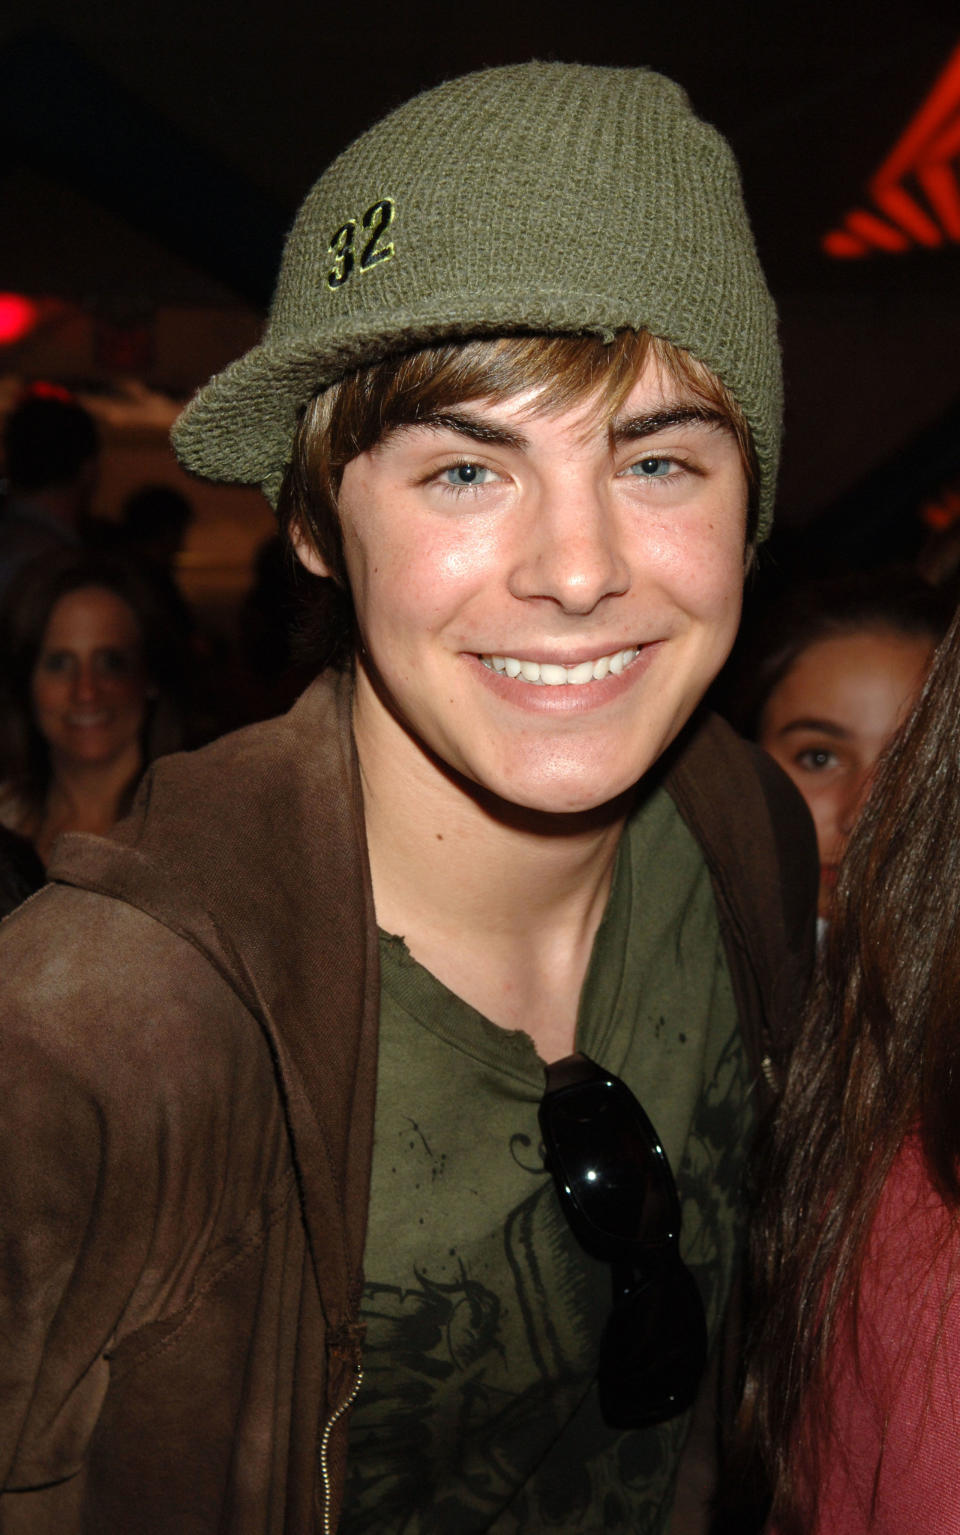 <p>Meanwhile, Zac's hat game was ... dubious?</p>